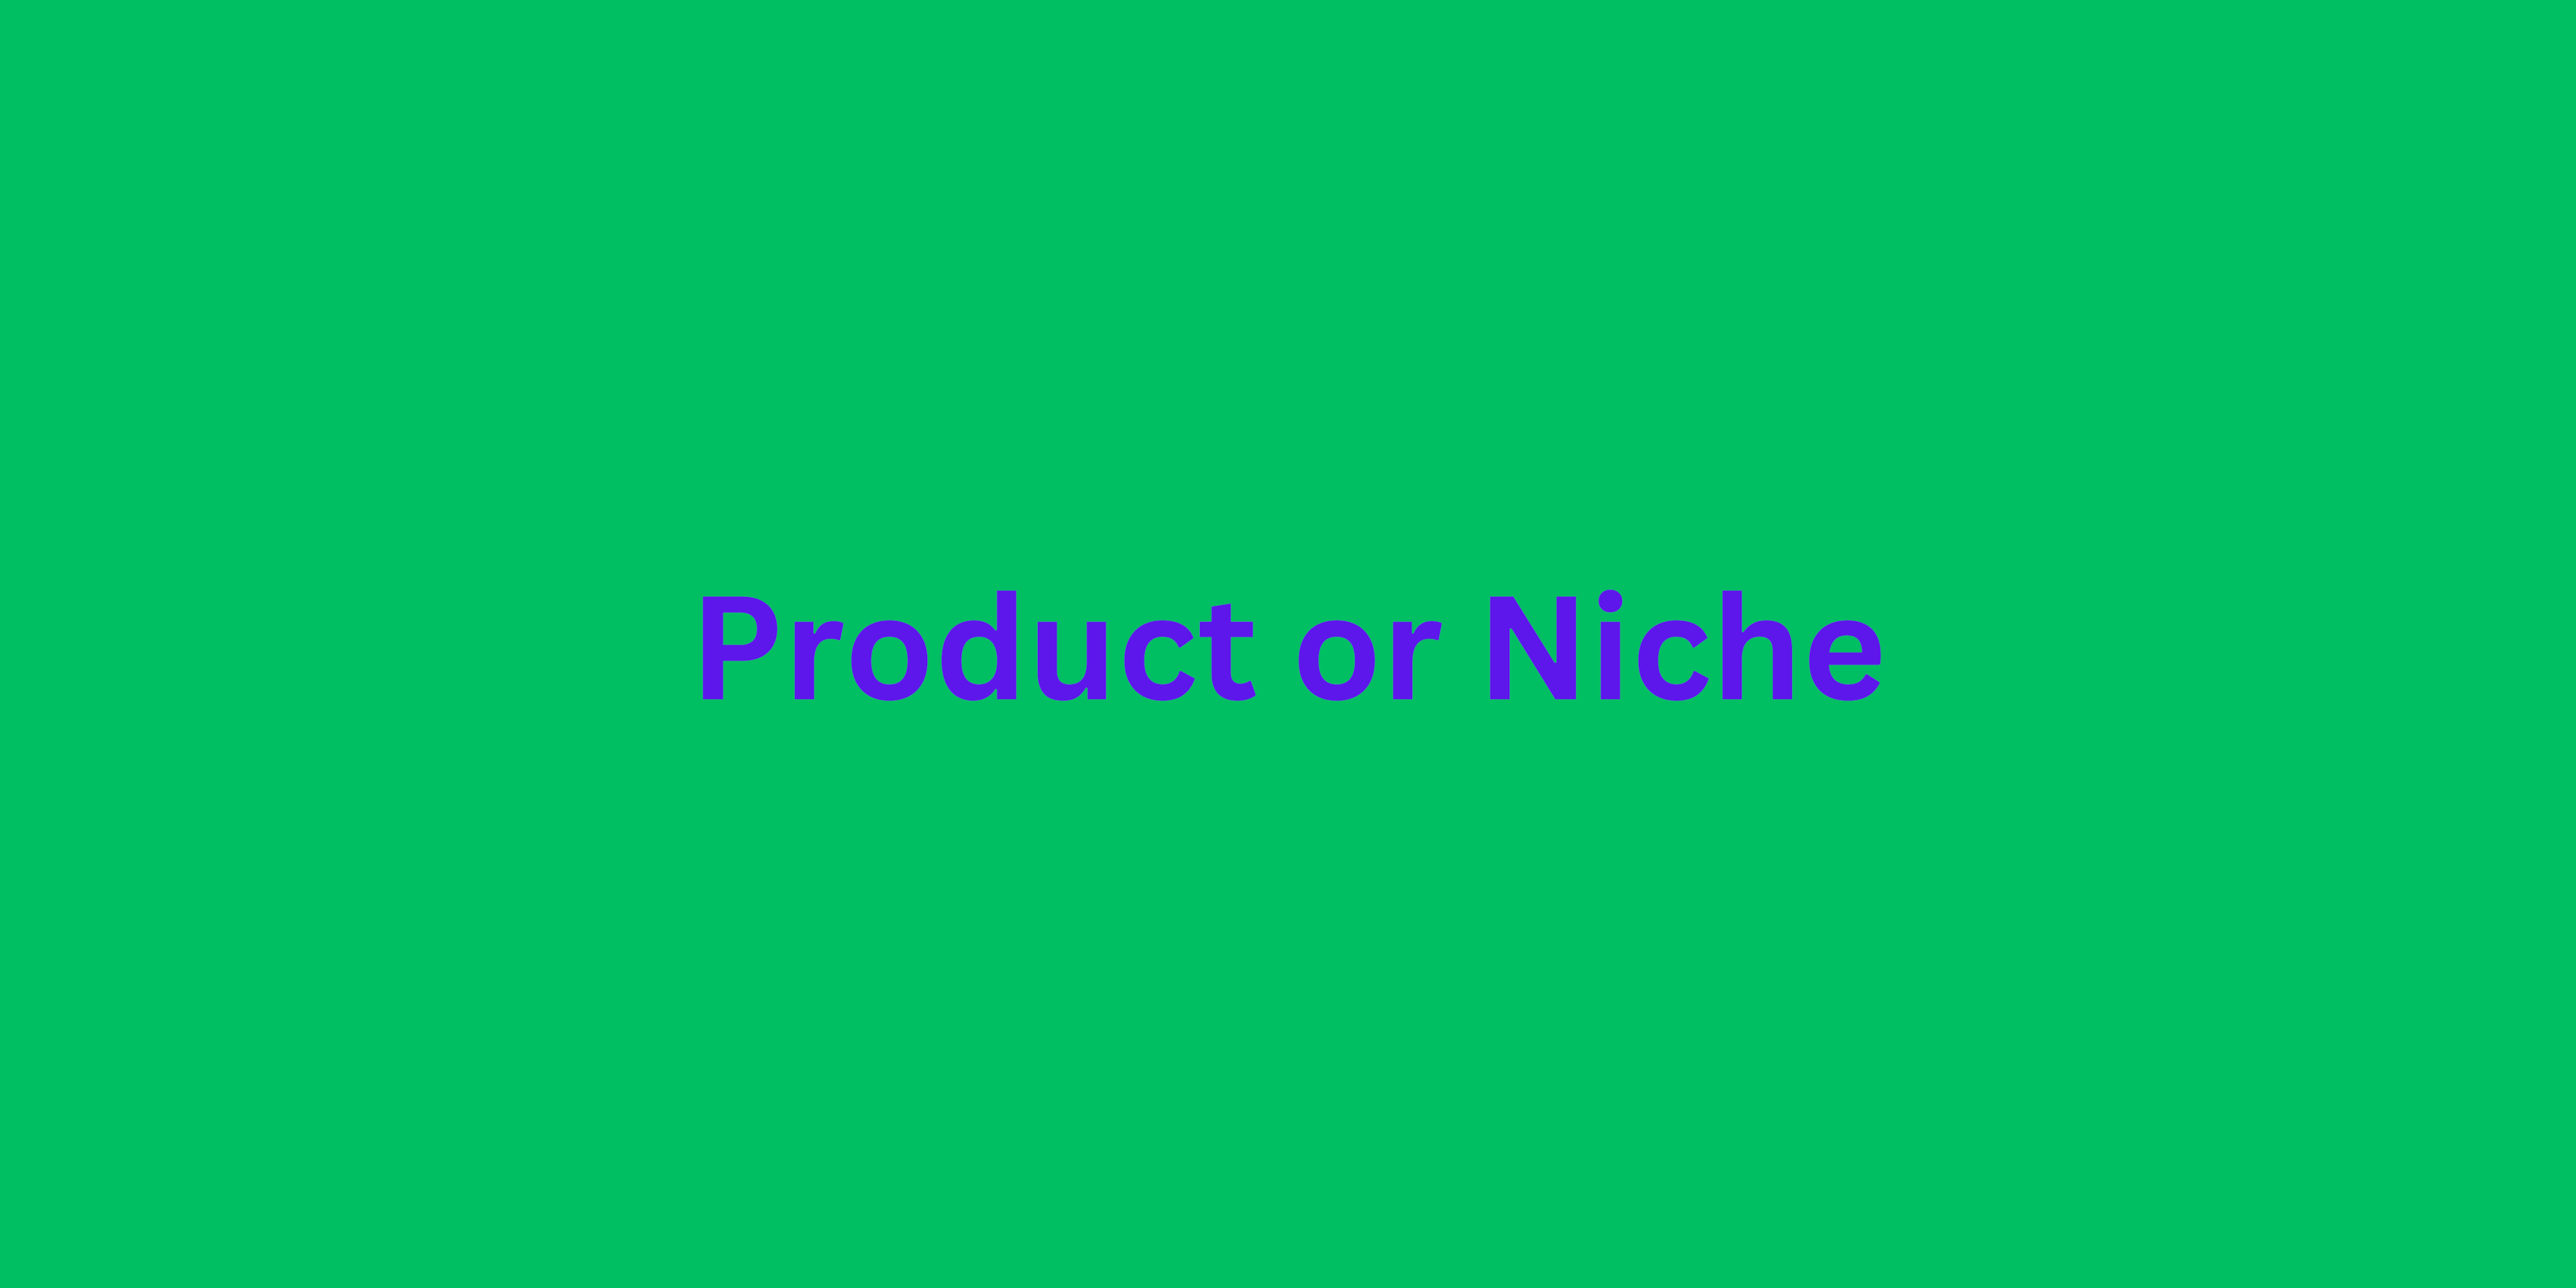 Product or Niche